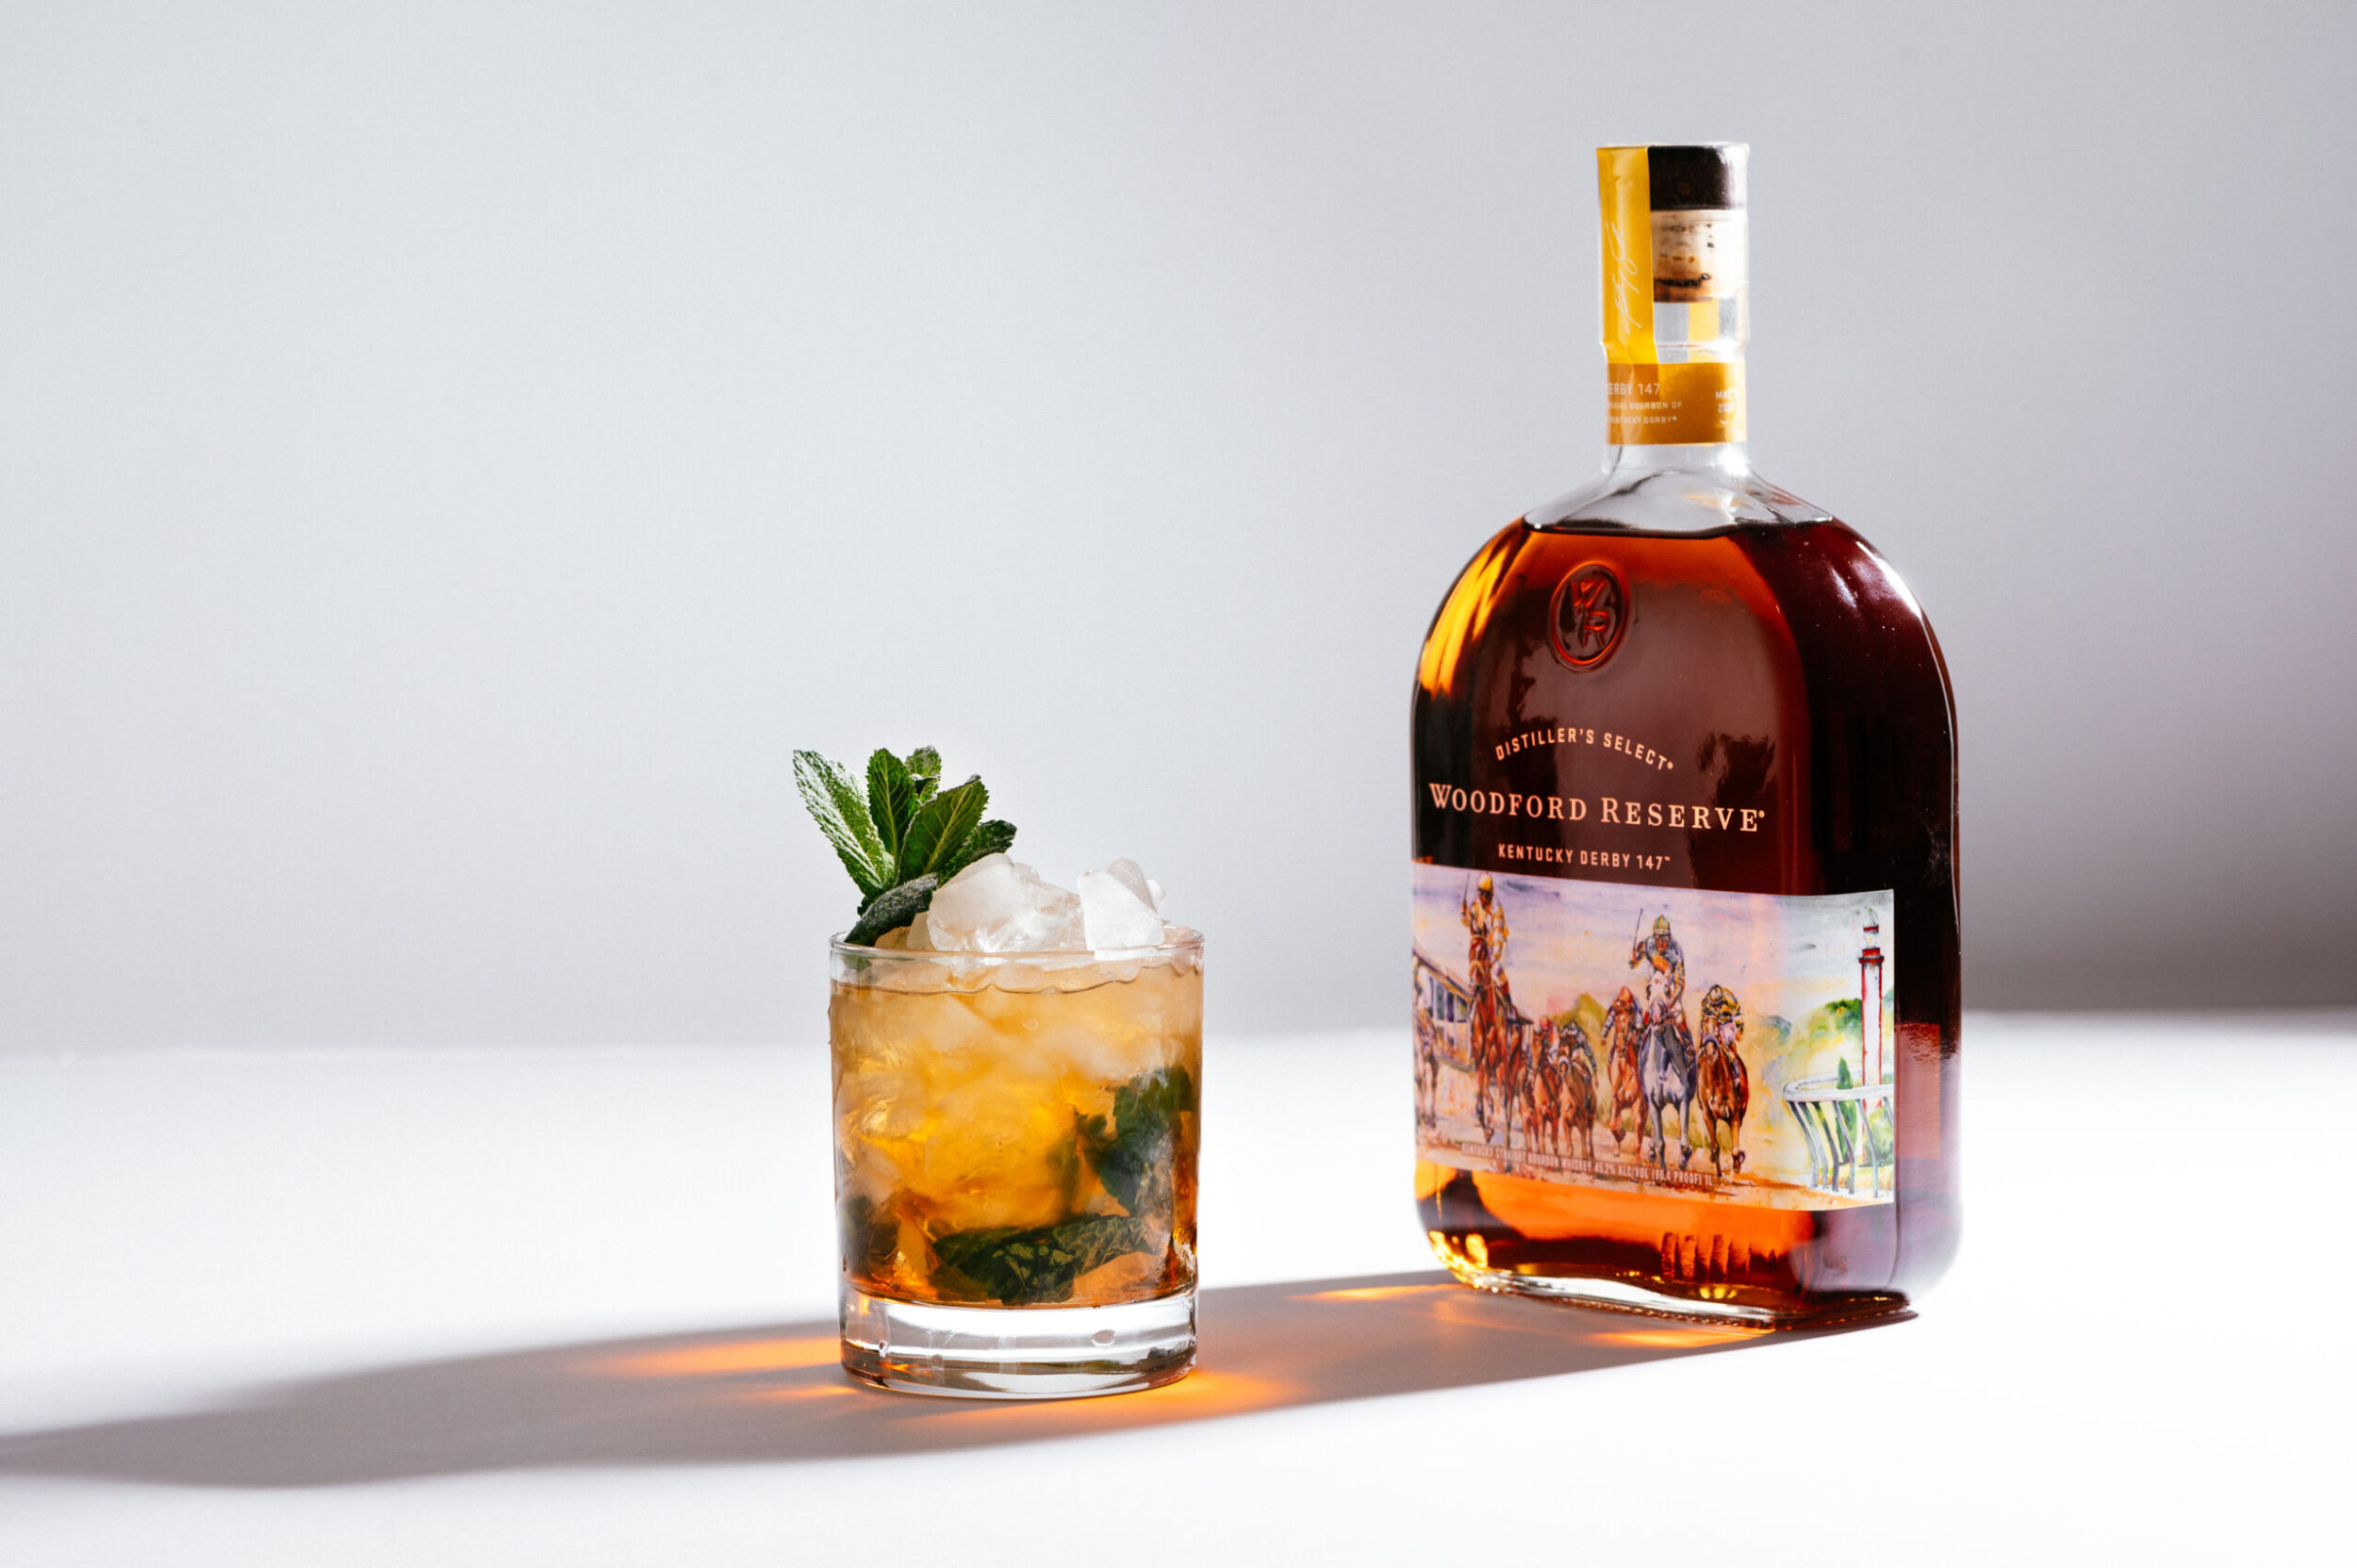 Woodford Reserve Kentucky Derby Edition No 147